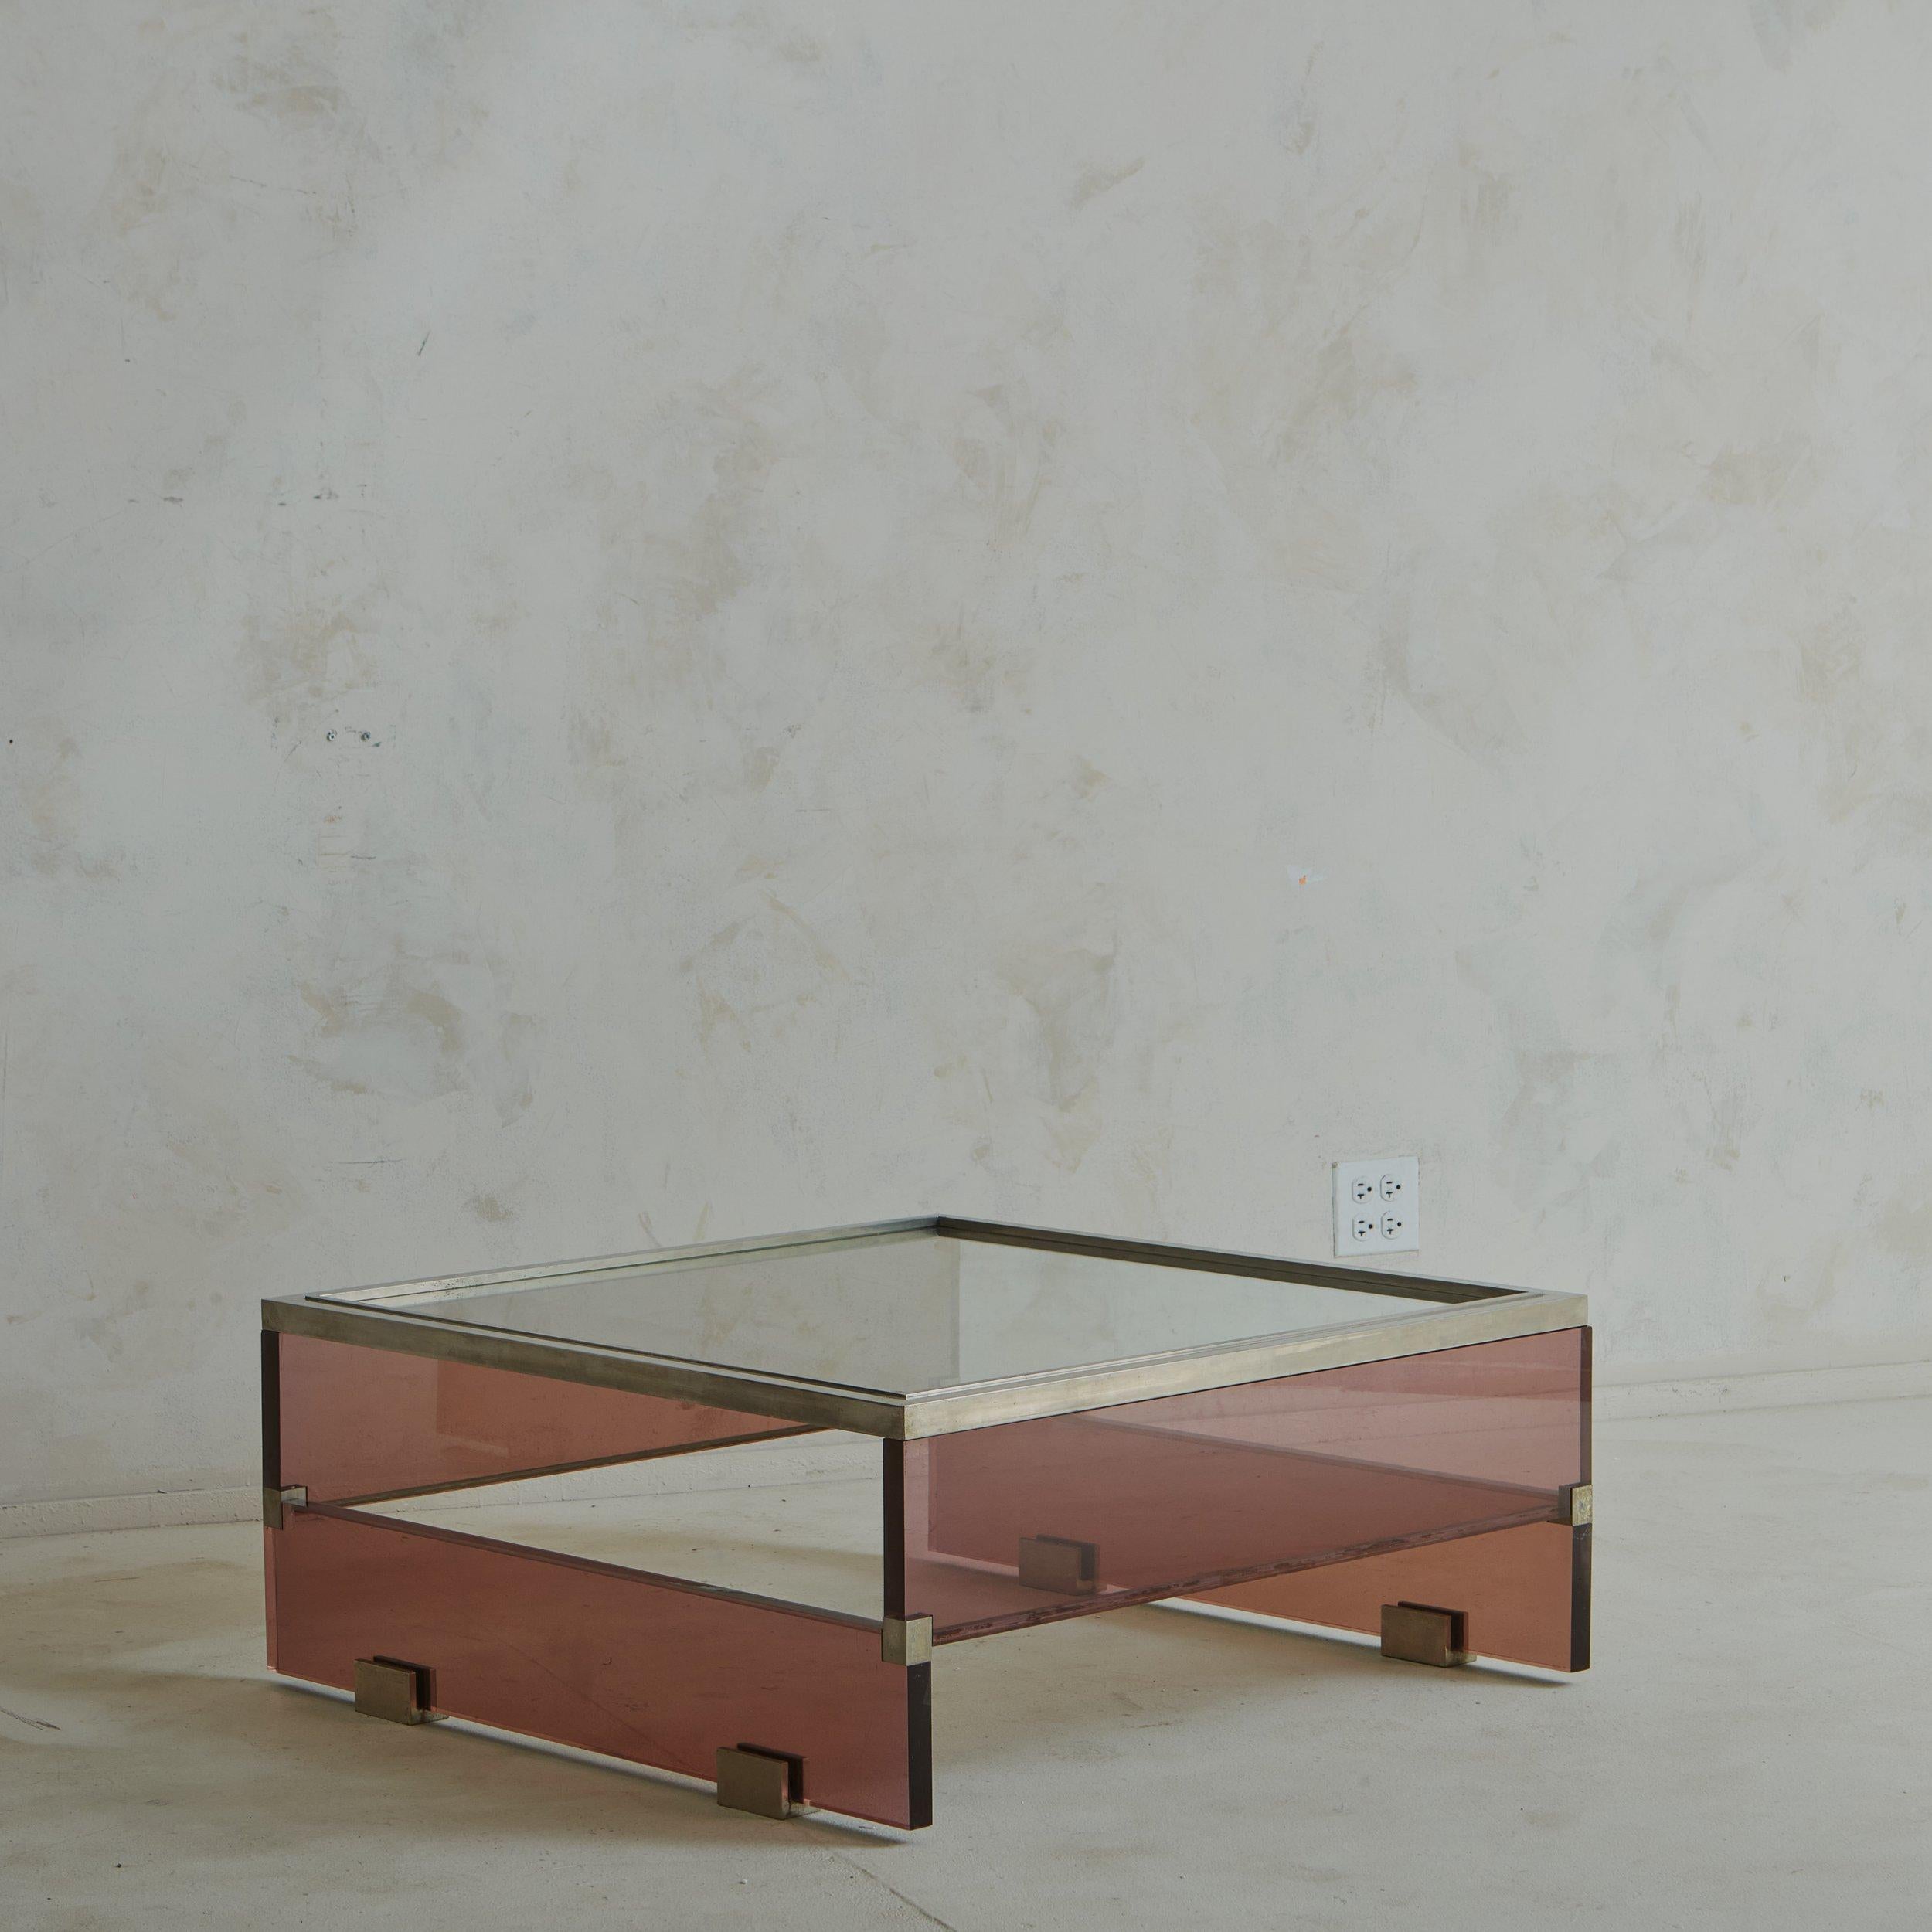 A 1970s French lucite coffee table set apart by its deep amethyst color. Sourced along the Cote D’Azur, we imagine this was a custom piece designed specifically for an estate along the French Riviera during the 1970s. This table has interlocking